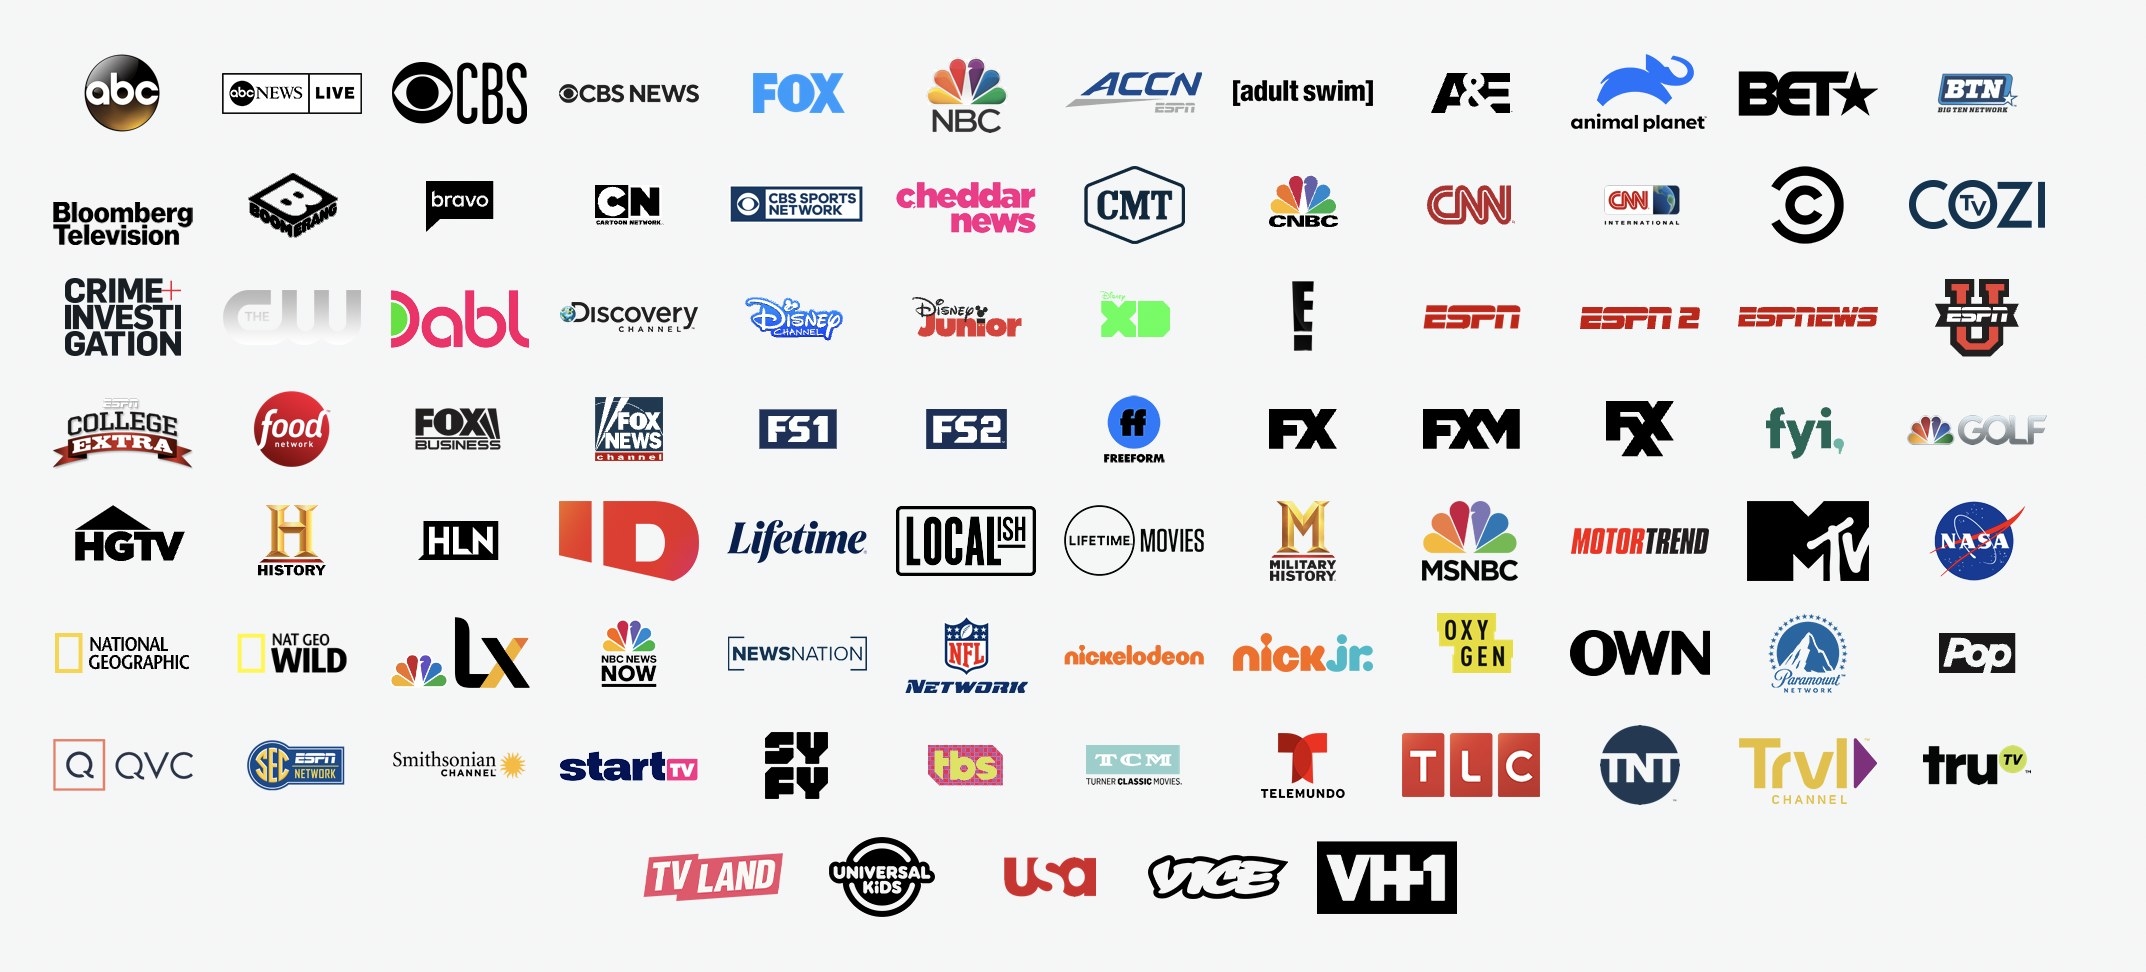 an image showing the logos of all the TV channels included in the live TV bundle